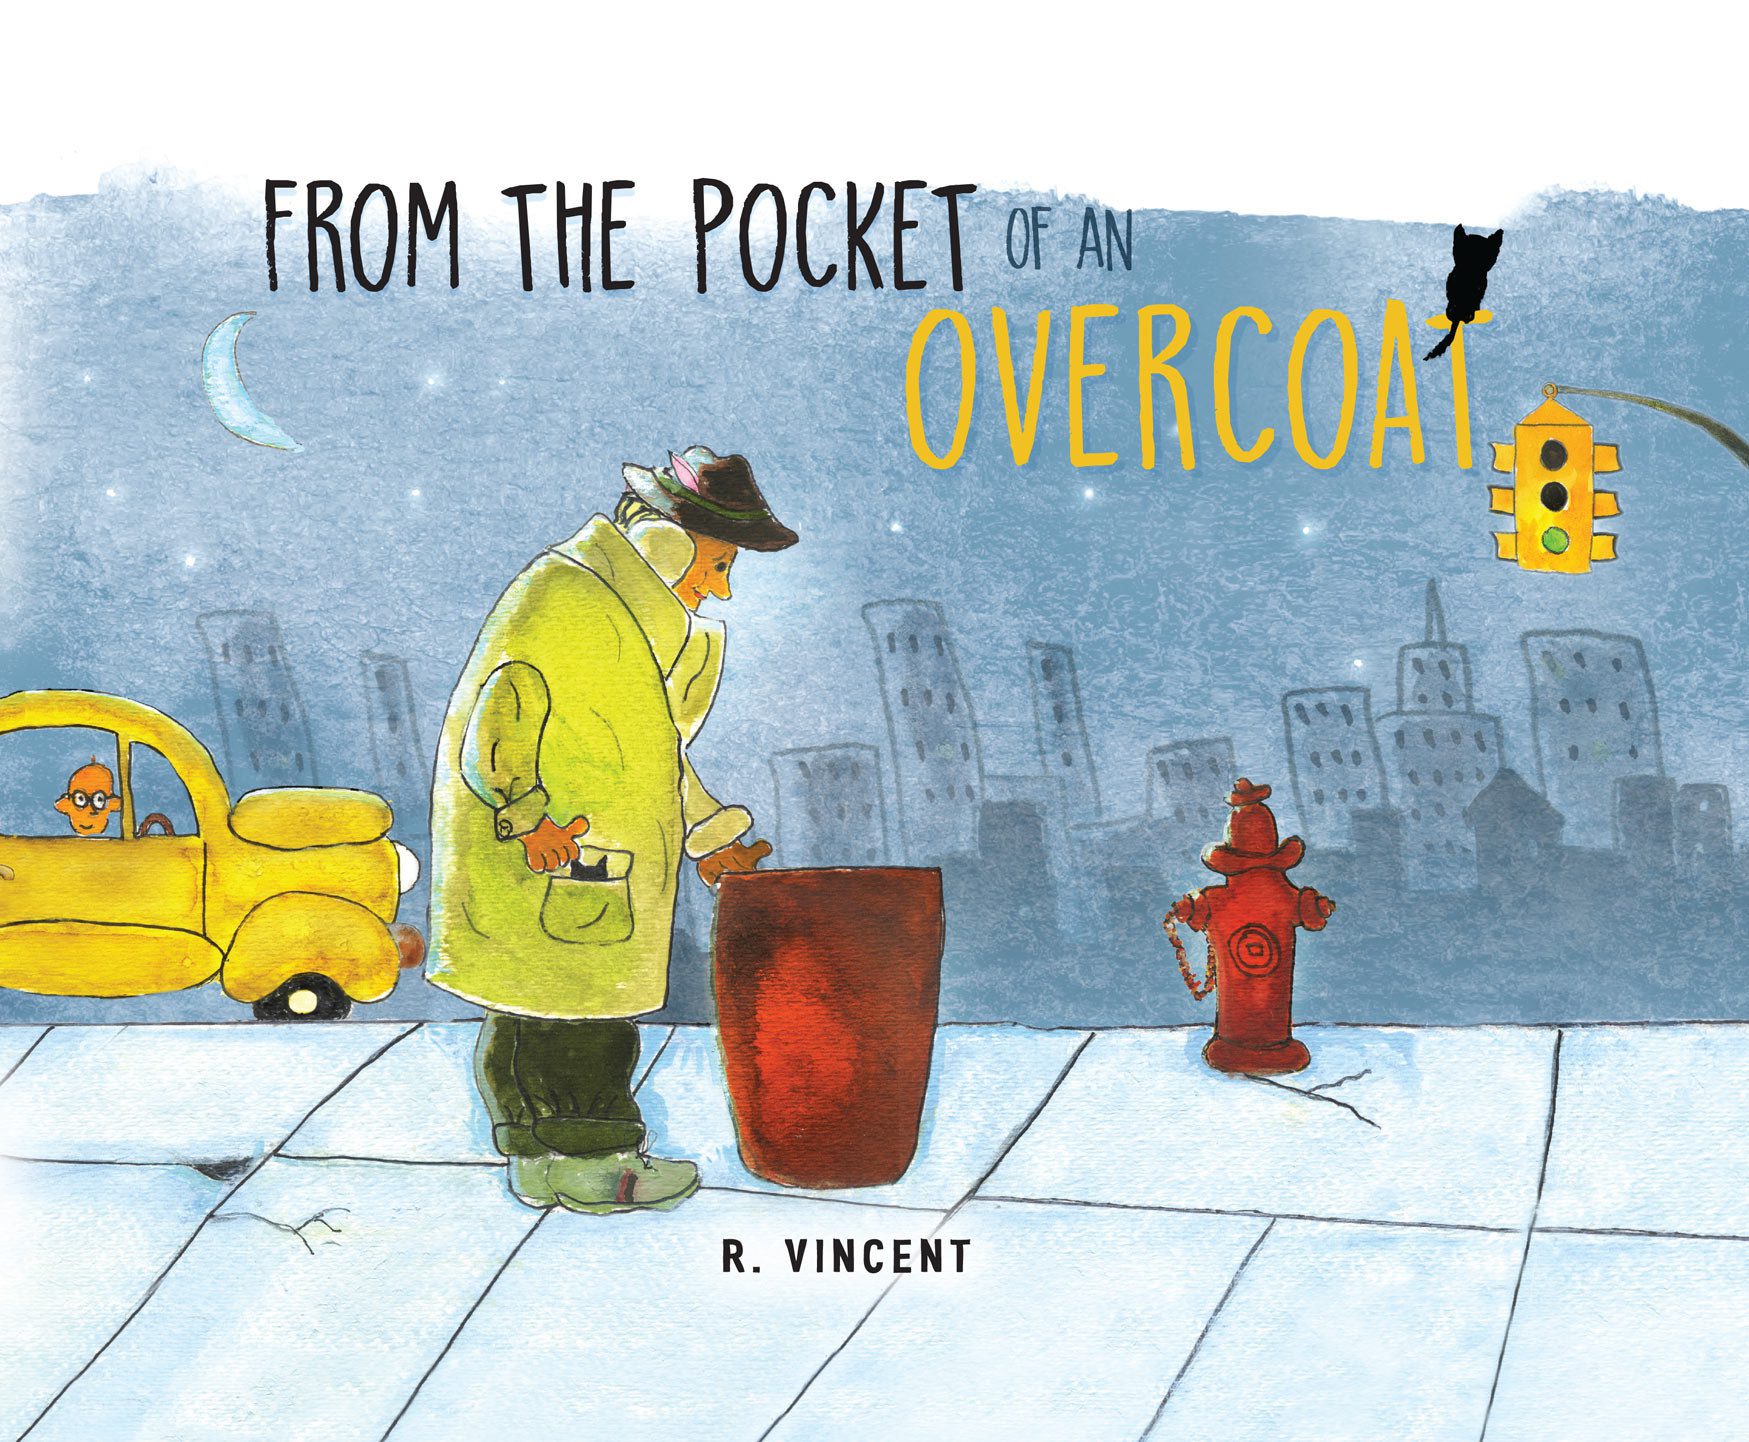 From the Pocket of an Overcoat